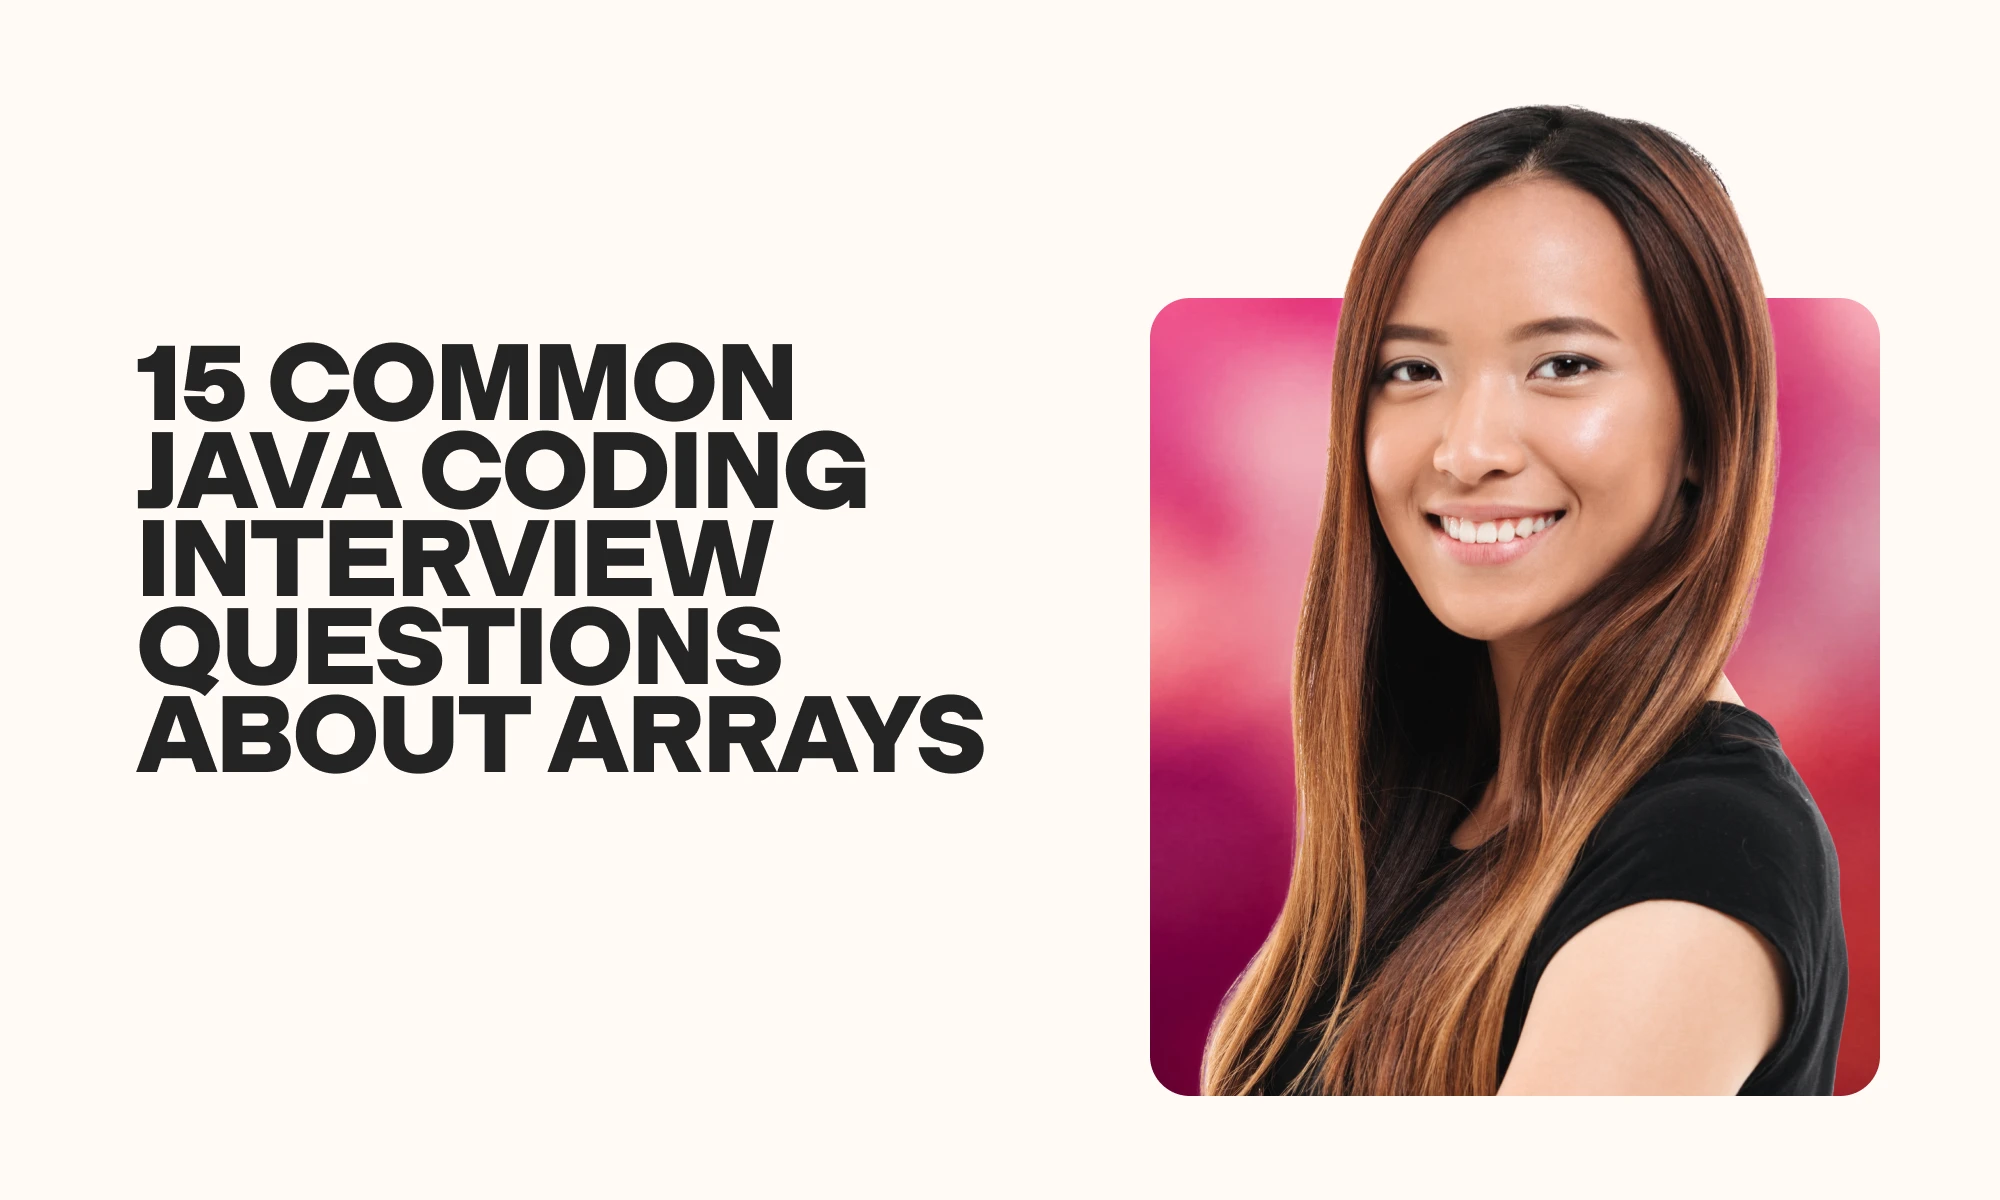 15 common Java coding interview questions about arrays